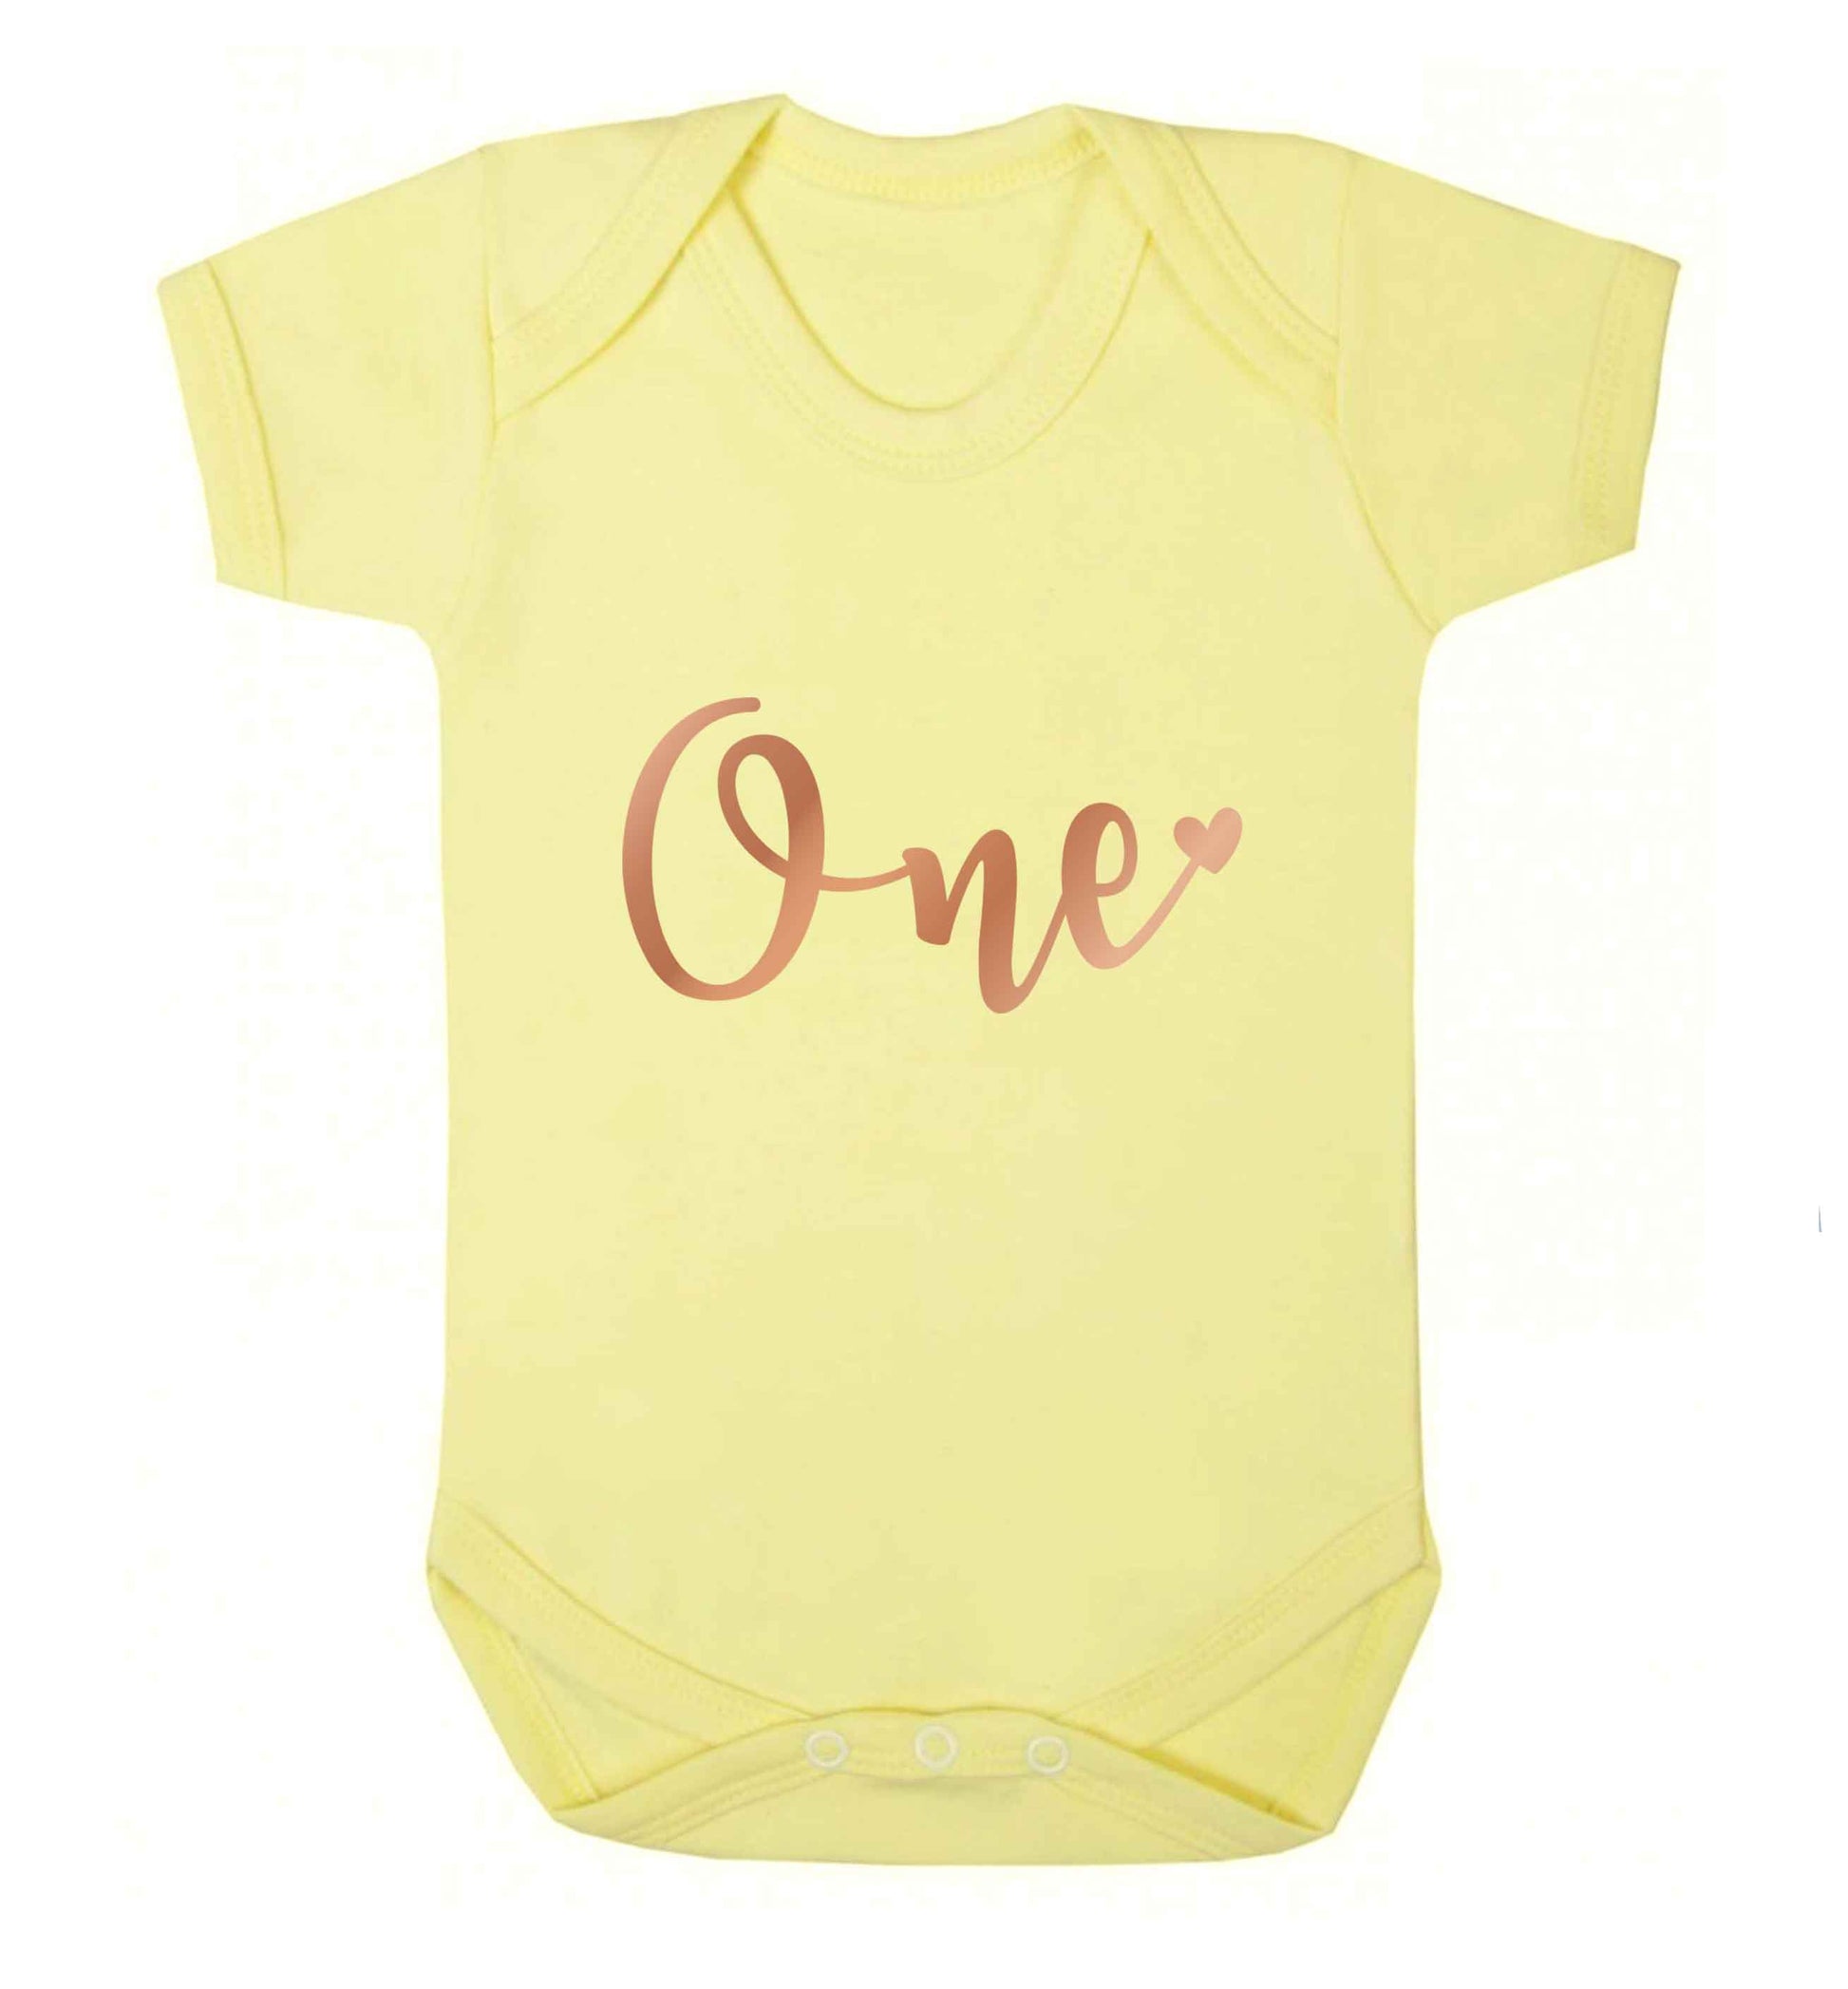 Rose Gold One baby vest pale yellow 18-24 months